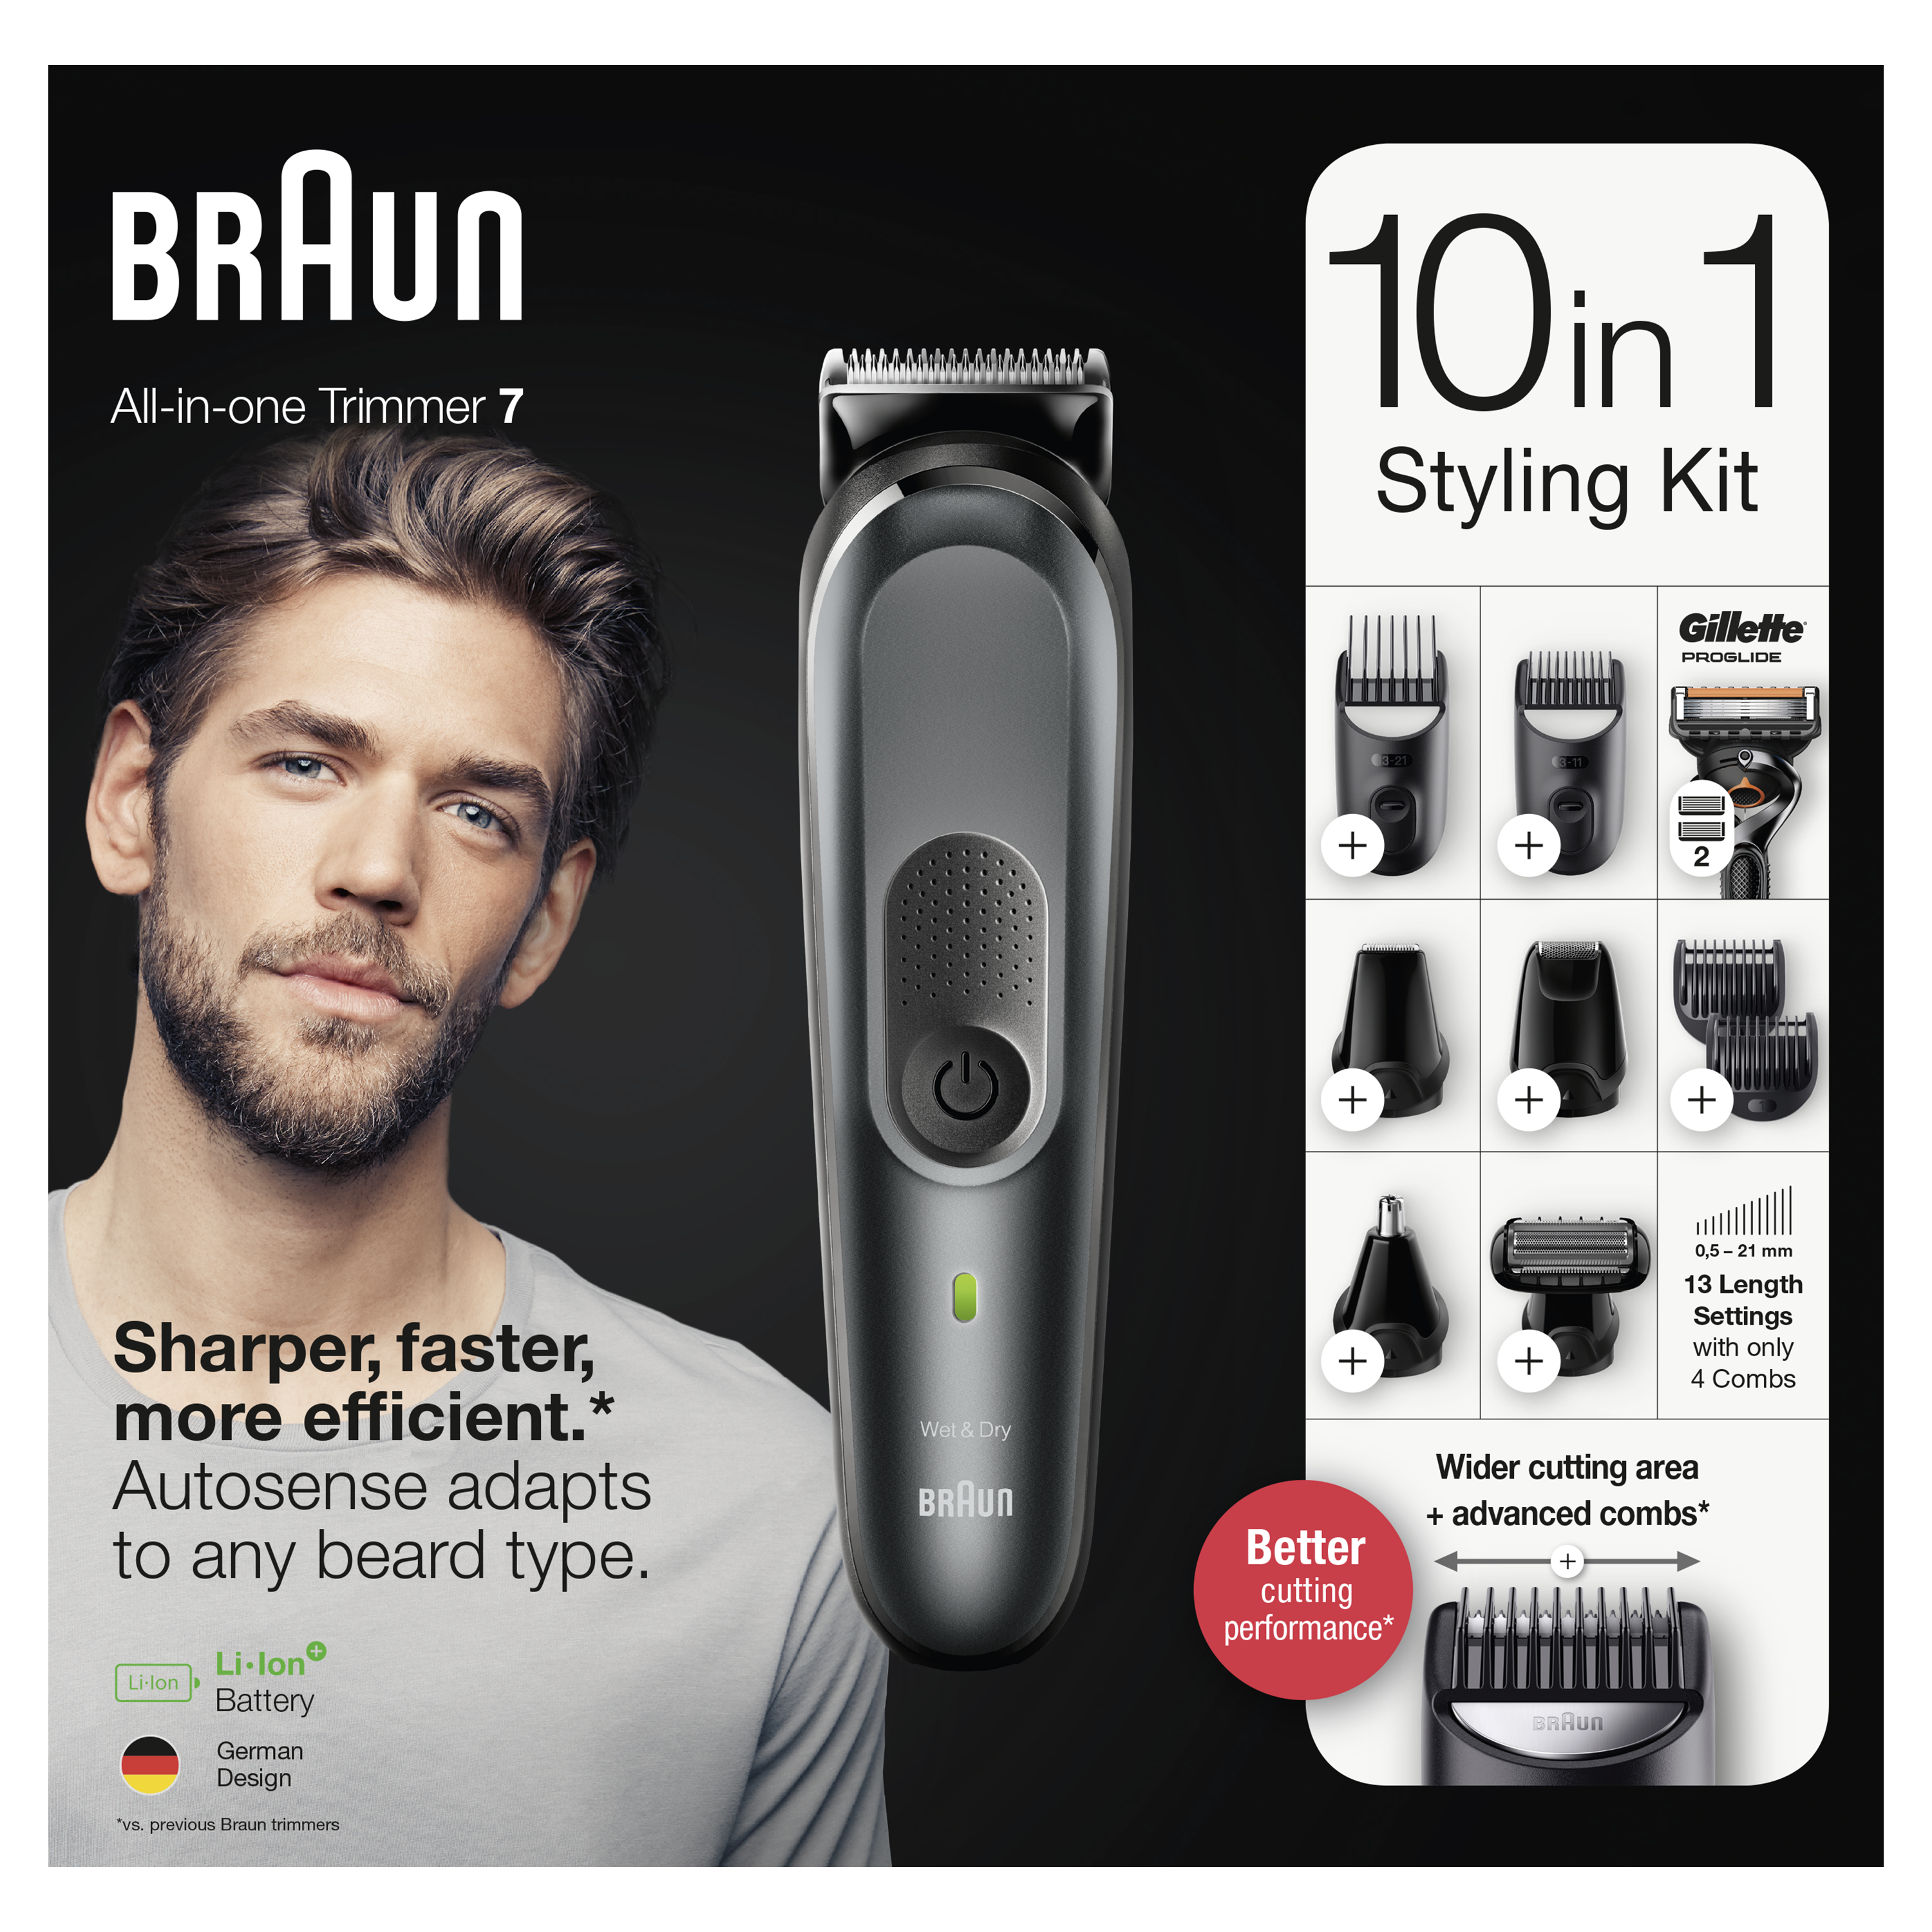 All-in-one Trimmer 7 Multitrimmer